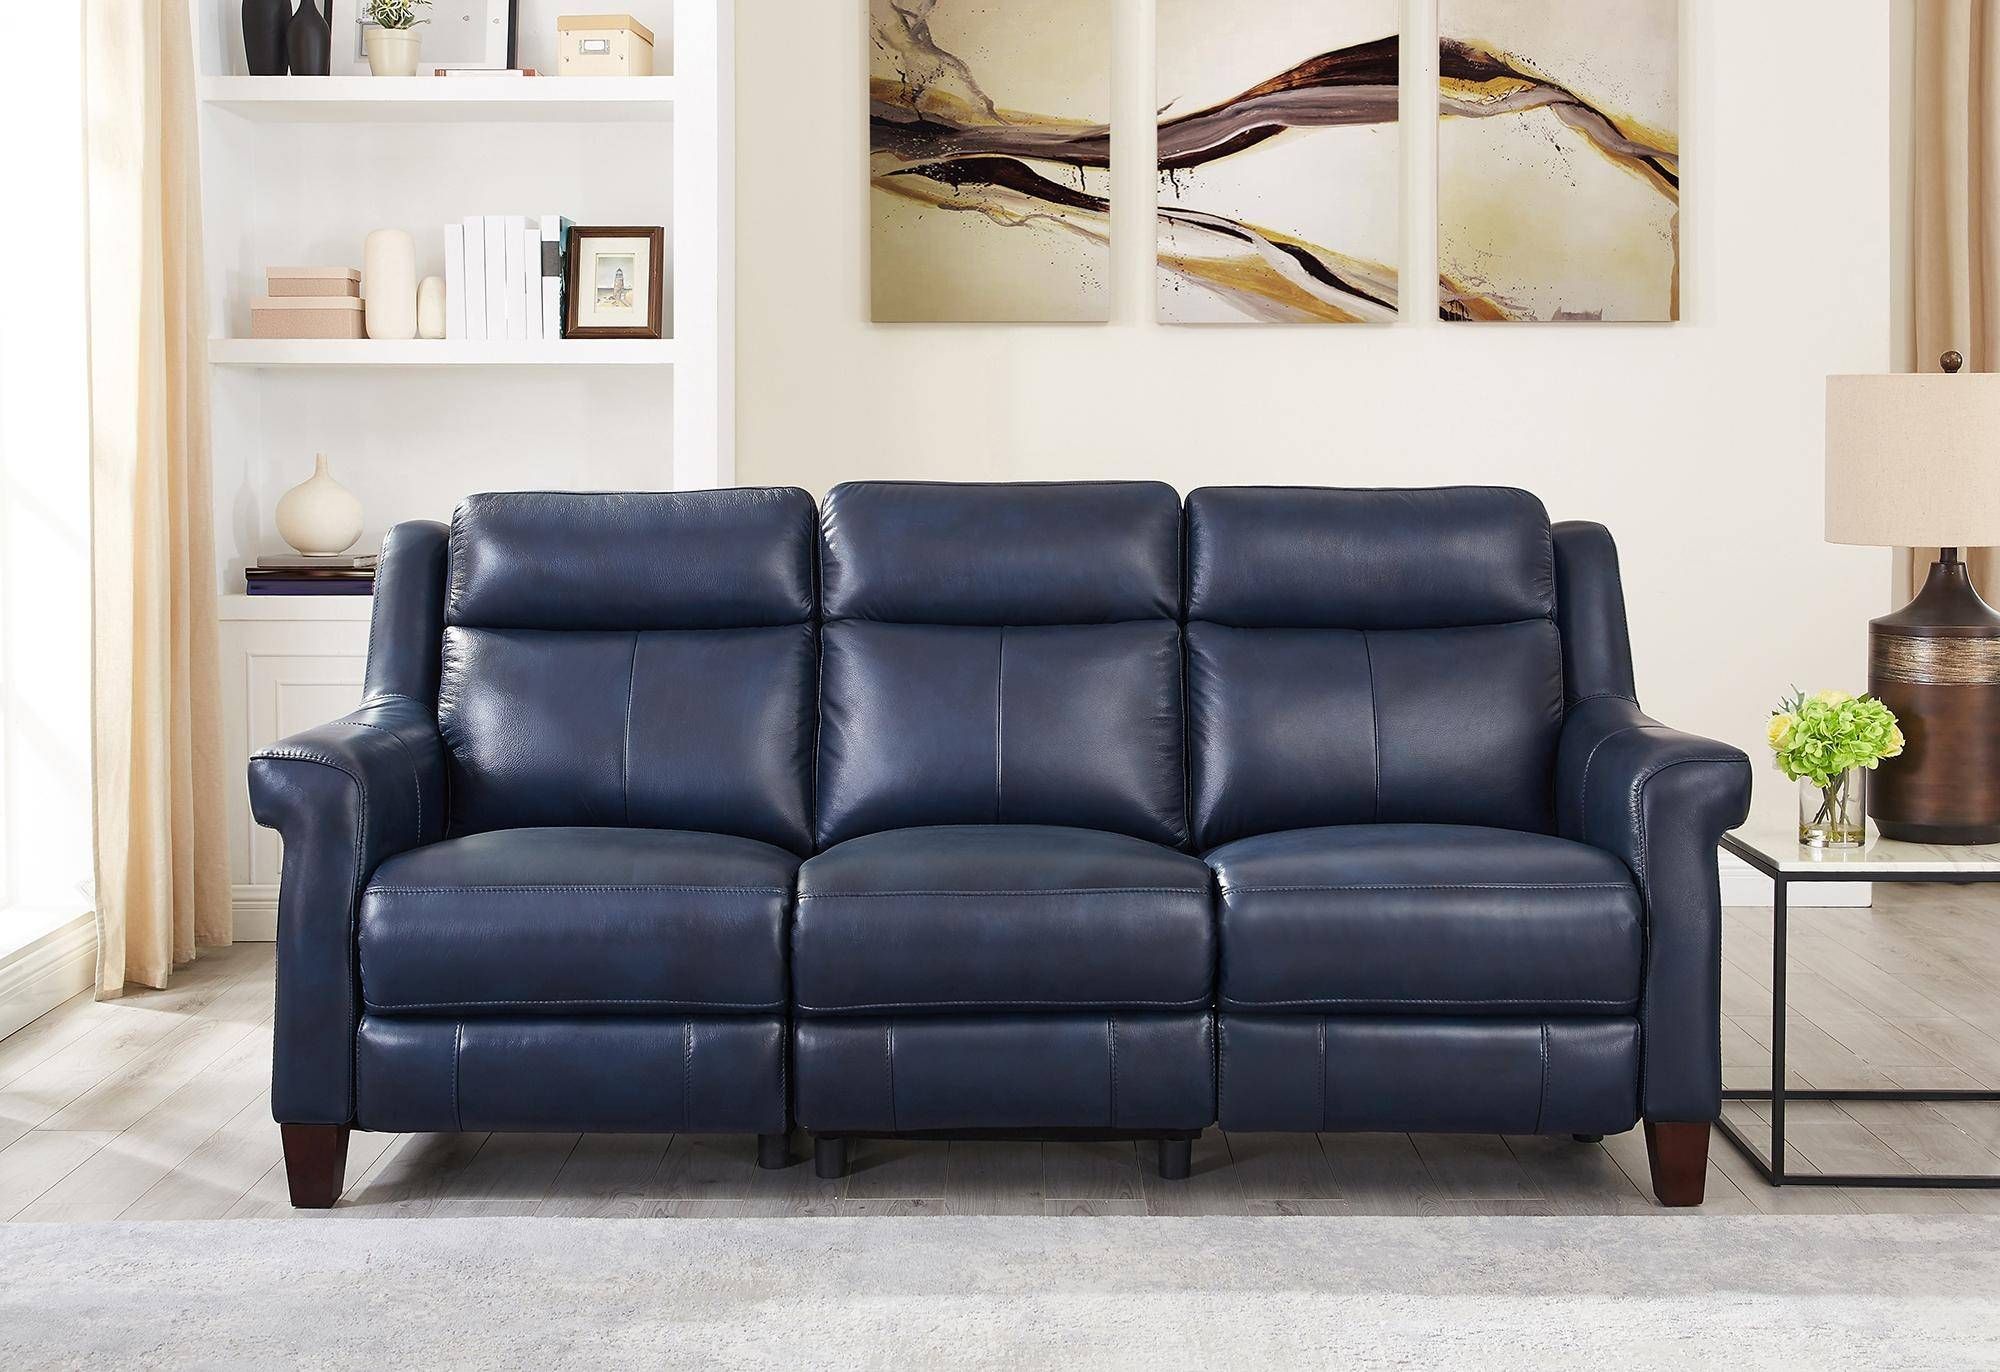 Chatham Blue Genuine Leather Power Reclining Sofa Loveseat Intended For Power Reclining Sofas (View 5 of 15)